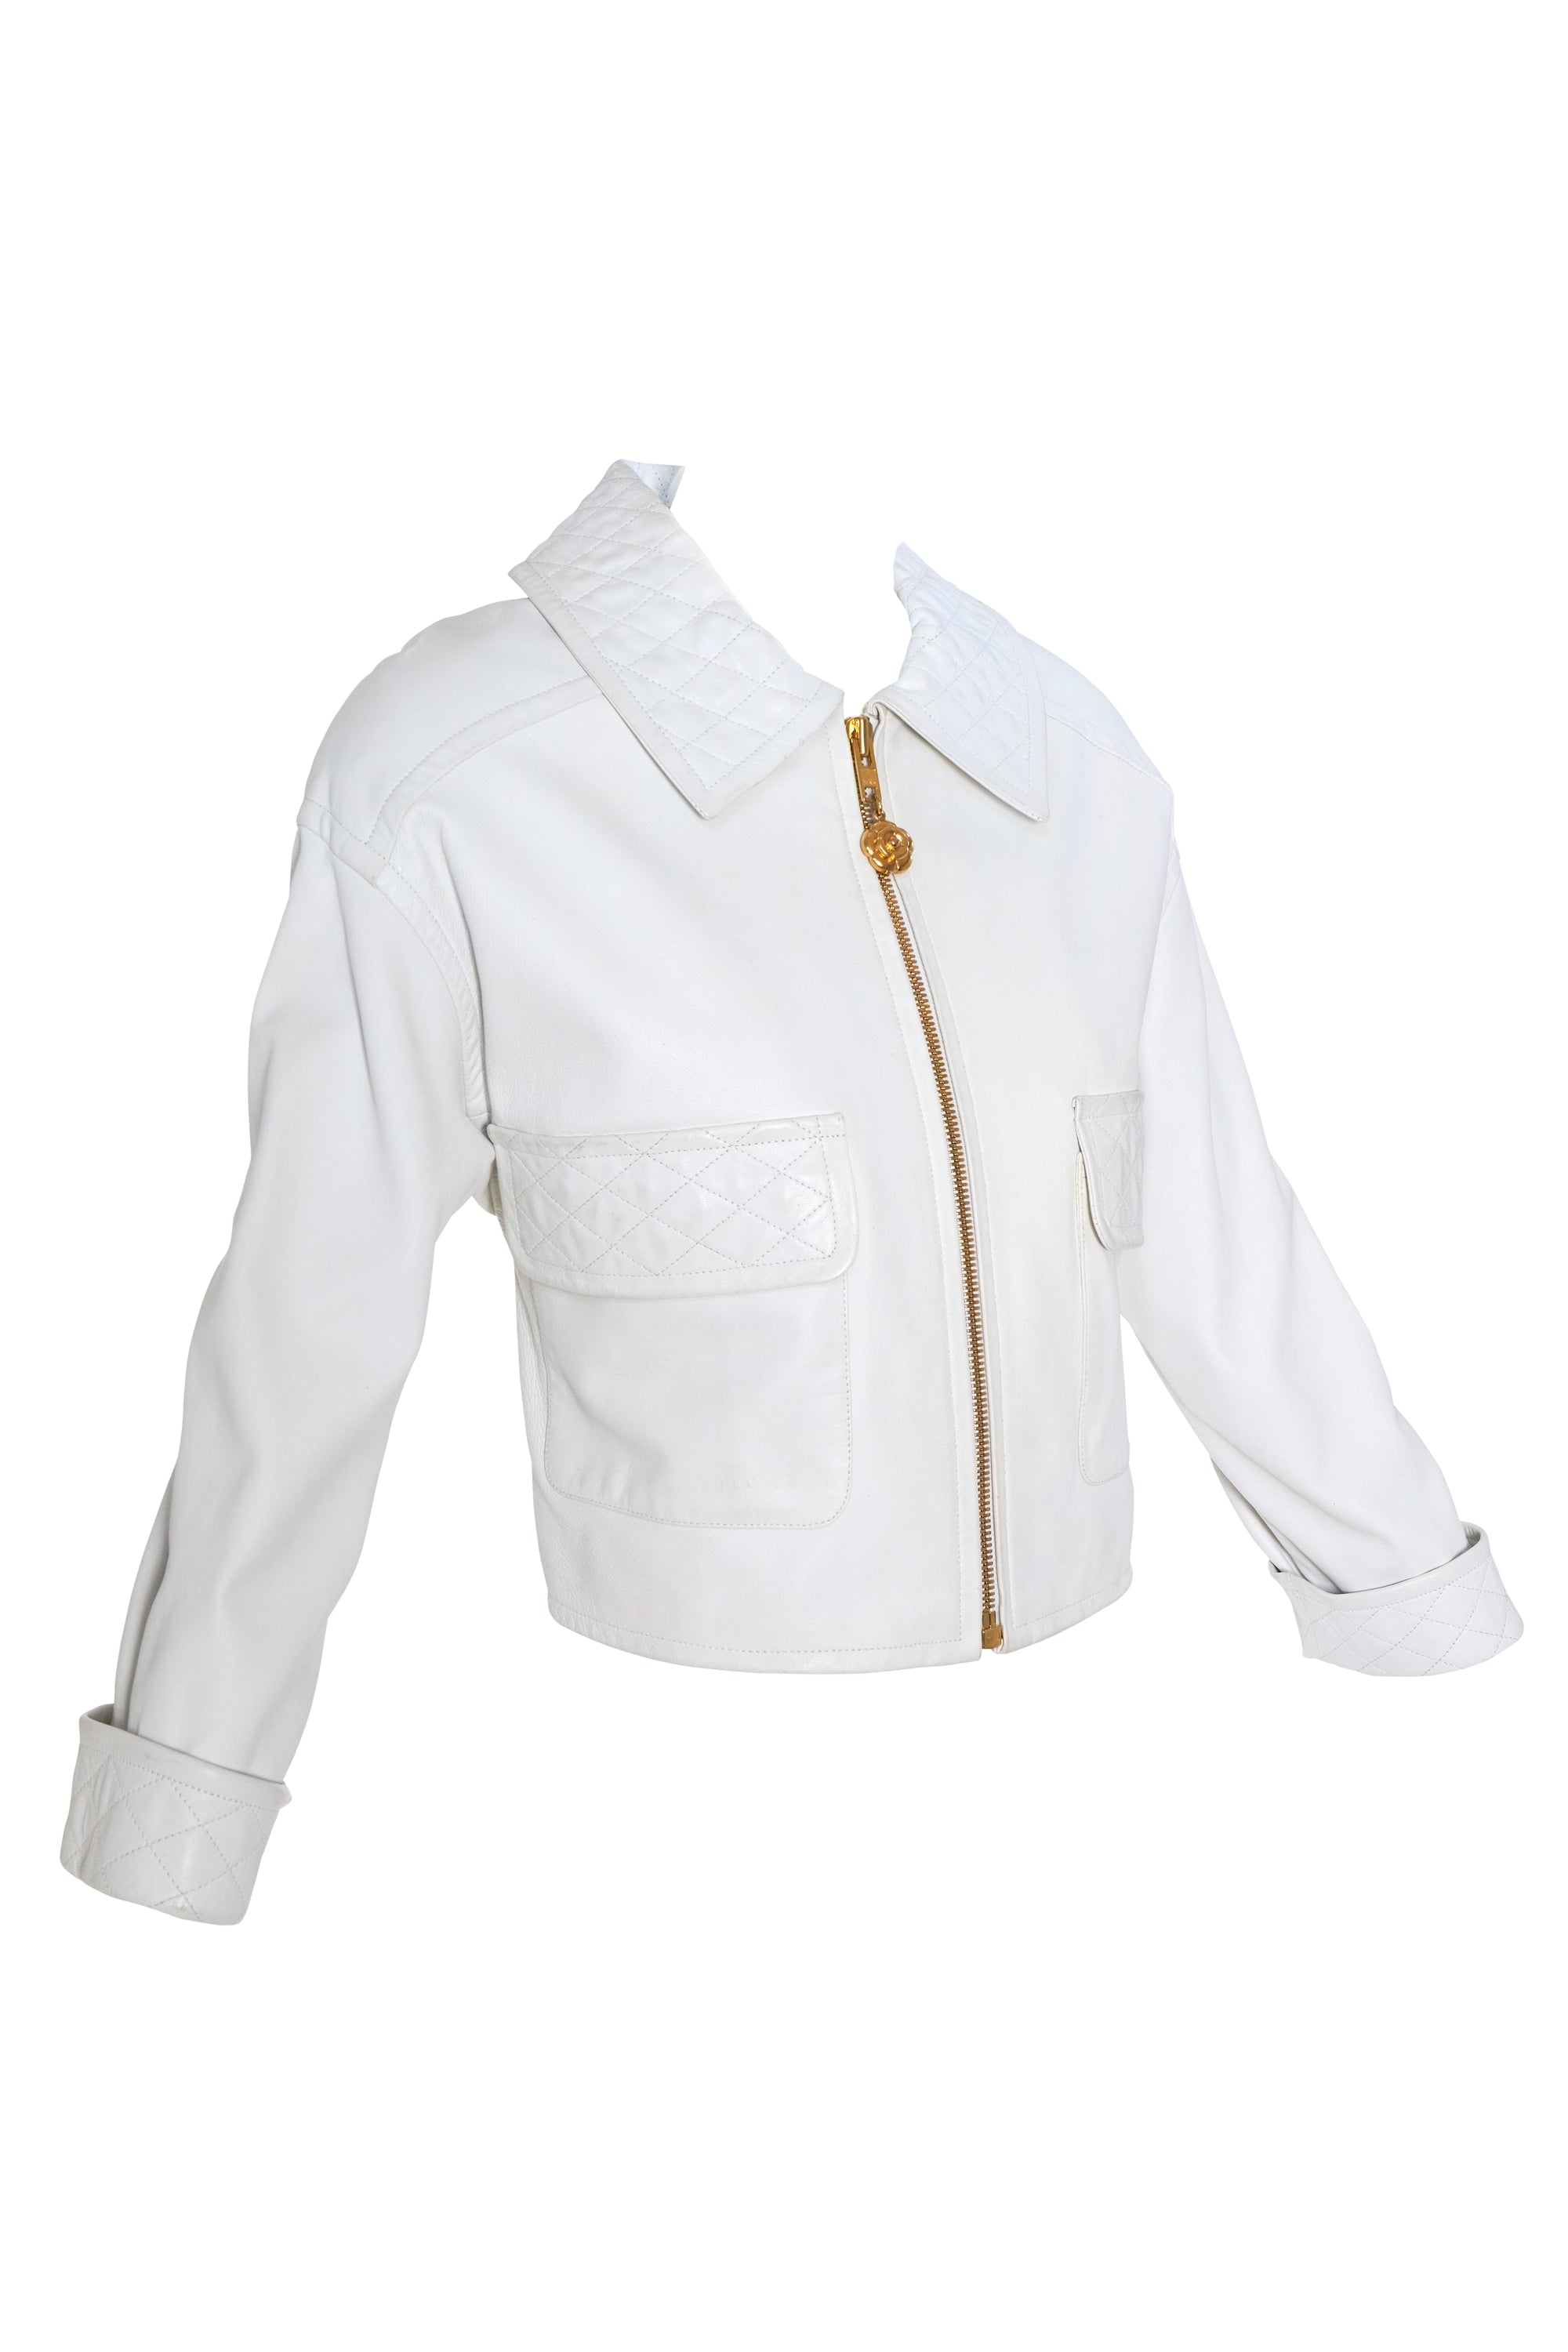 Chanel Boutique White Quilted Leather Bomber Jacket